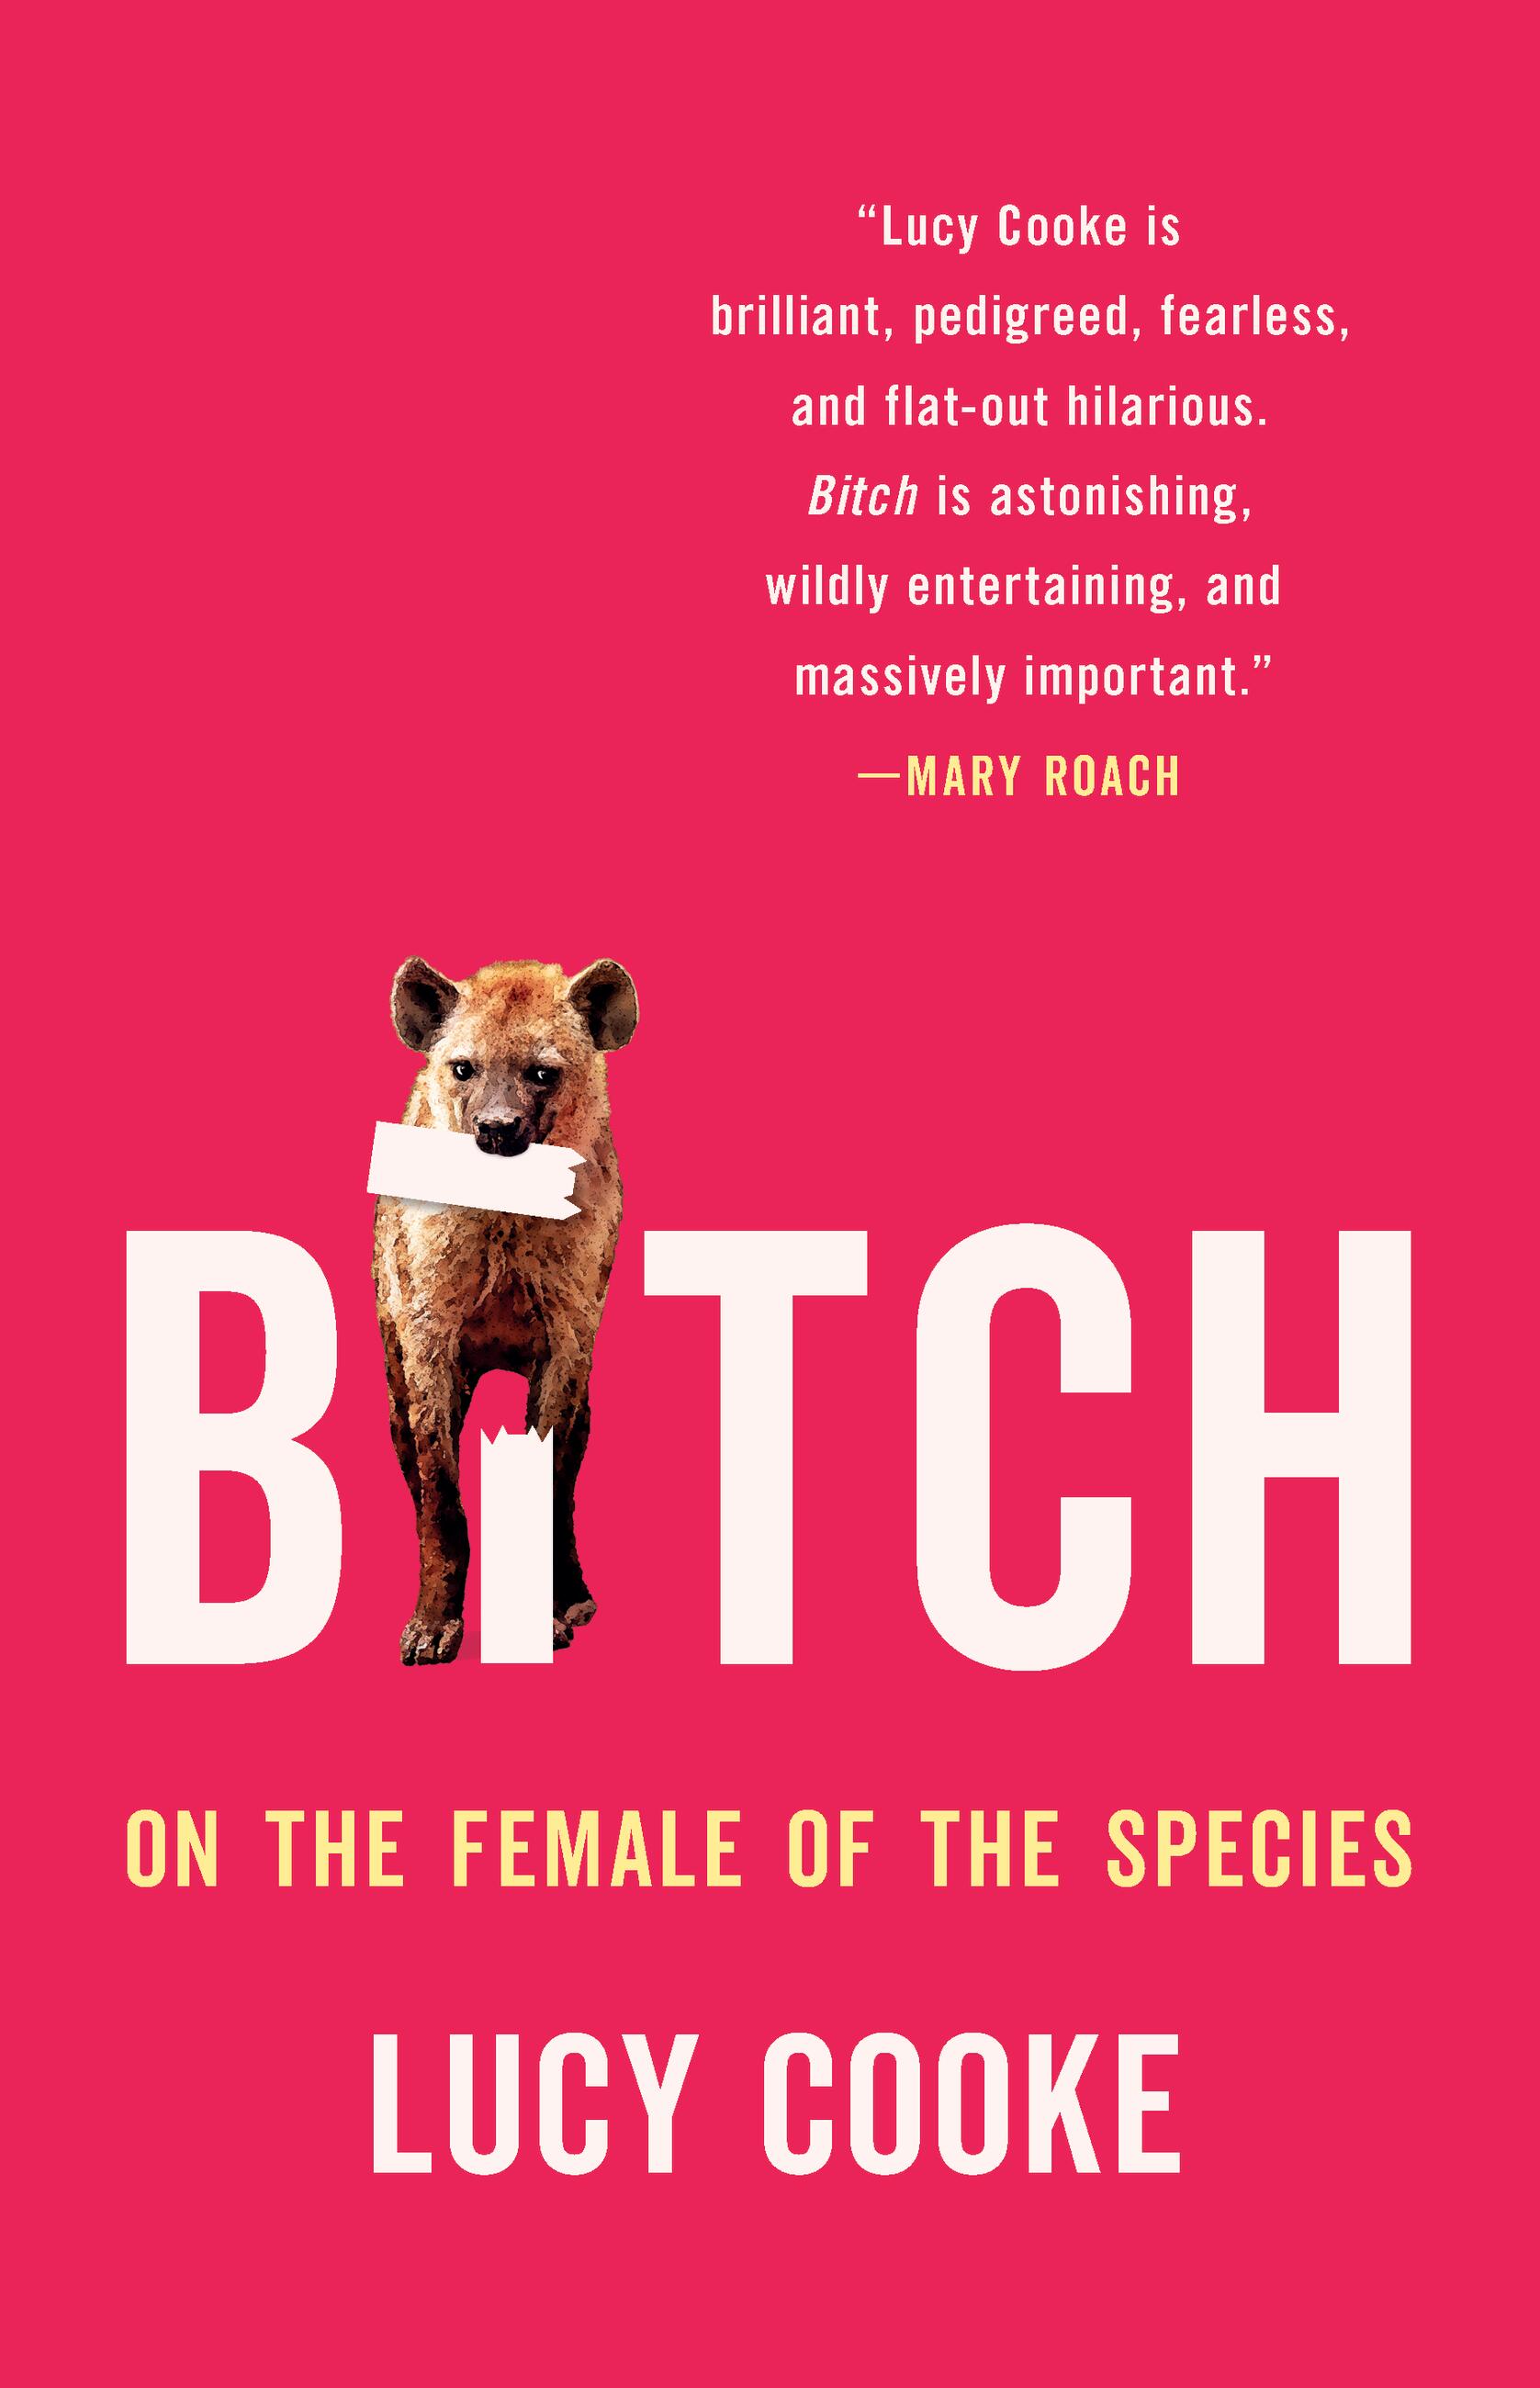 Bitch by Lucy Cooke  Hachette Book Group